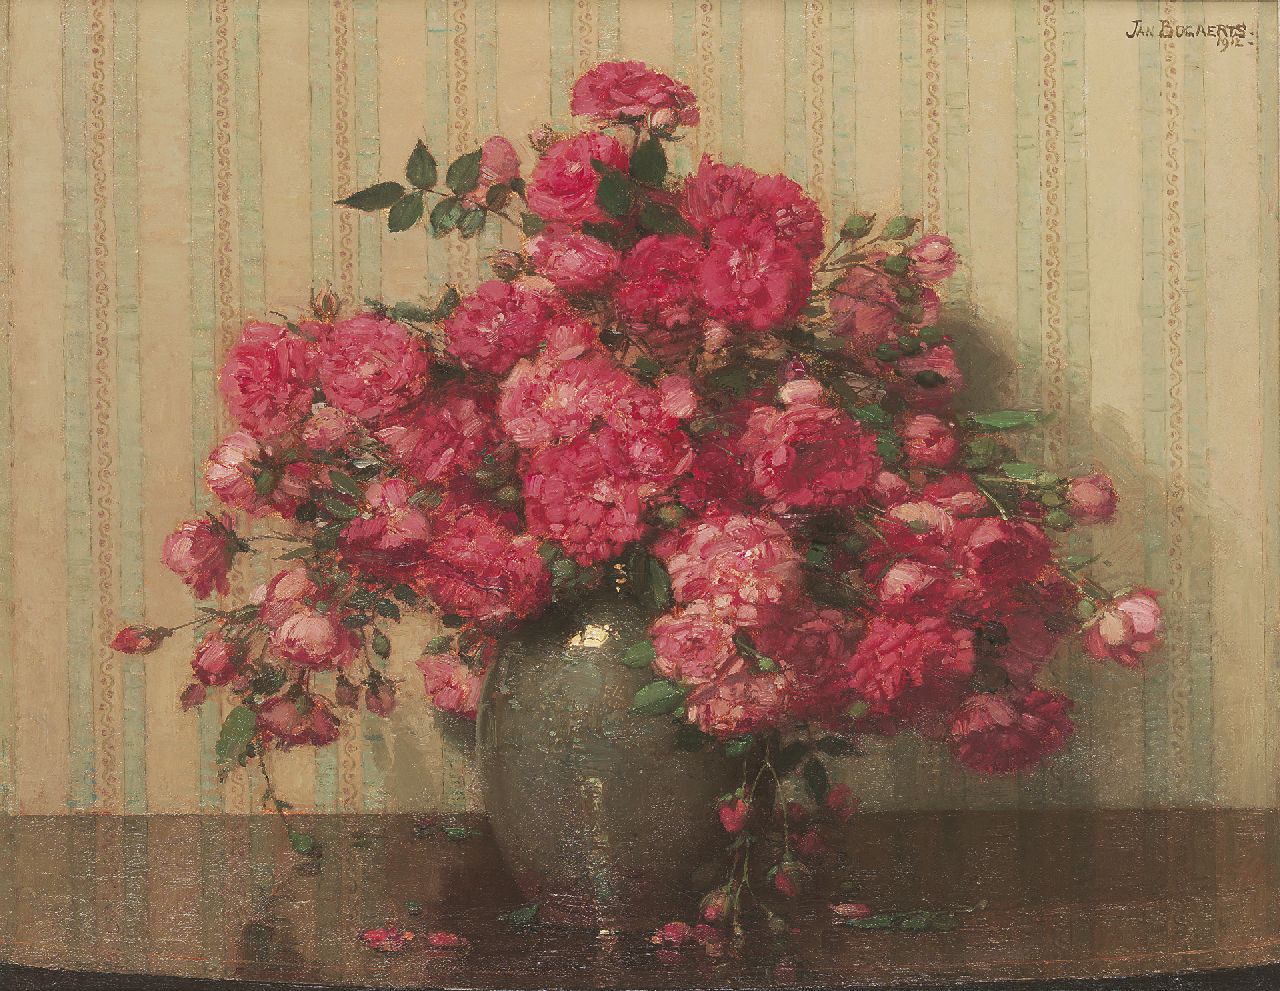 Bogaerts J.J.M.  | Johannes Jacobus Maria 'Jan' Bogaerts, Pink roses in a vase, oil on canvas 40.5 x 50.4 cm, signed u.r. and dated 1912